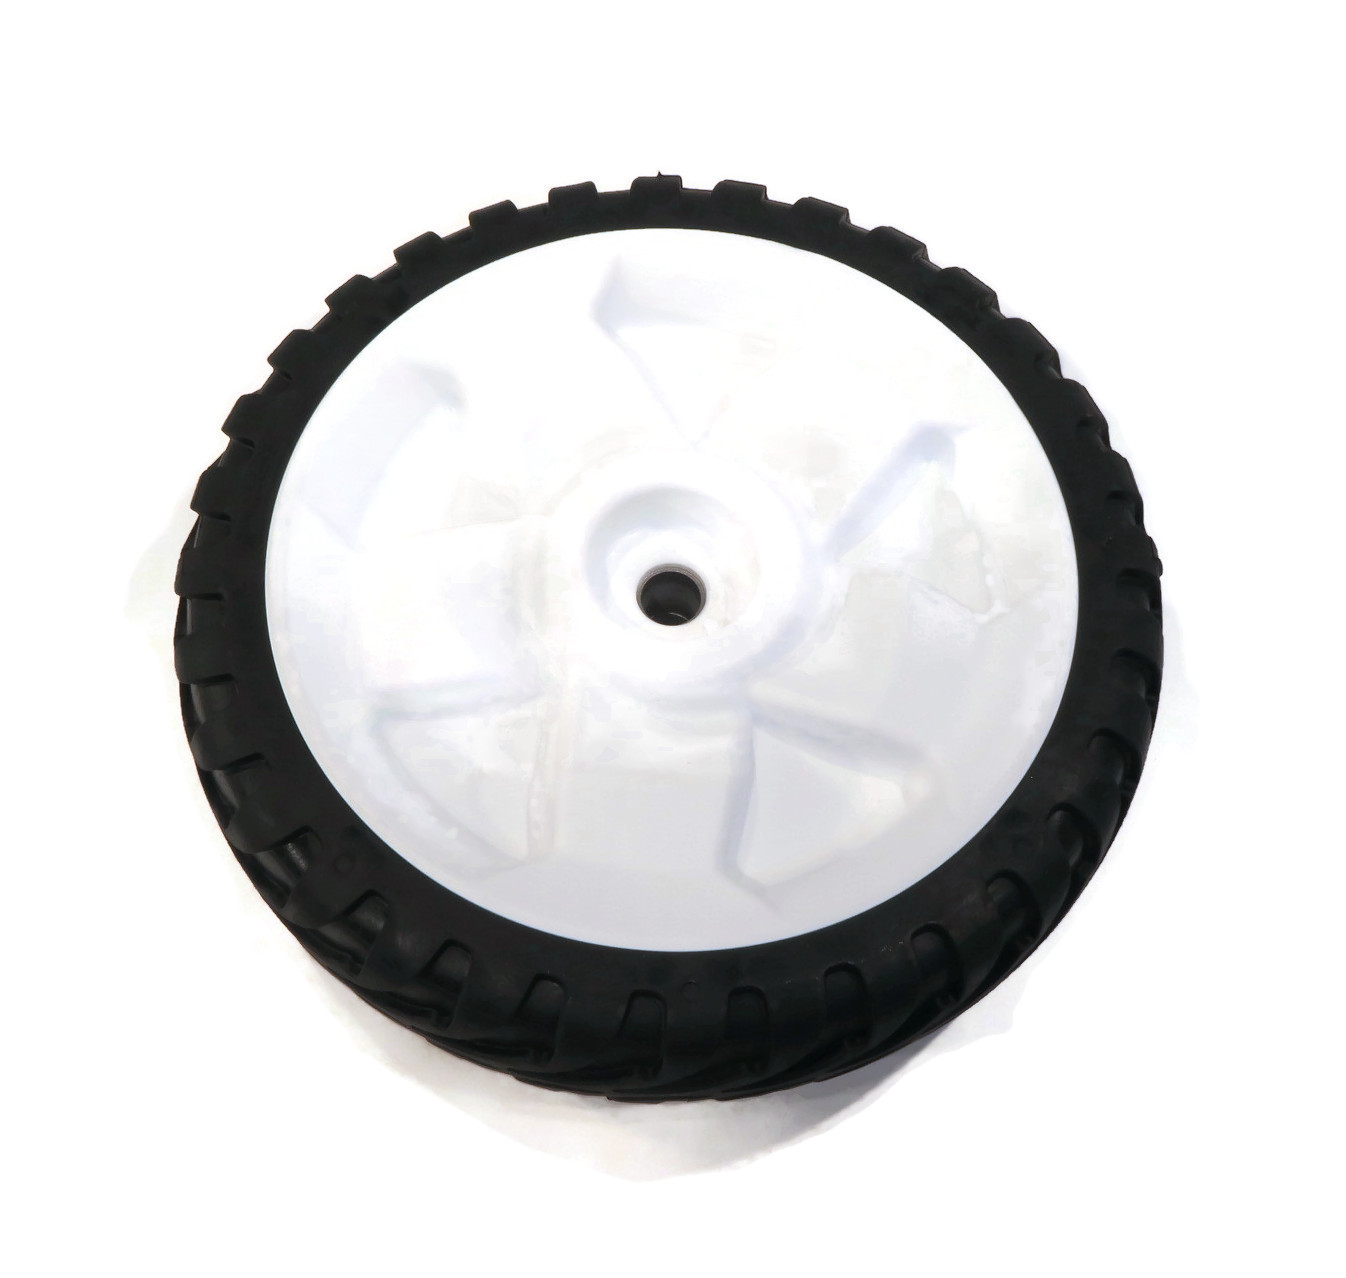 The ROP Shop | (2) TORO OEM Wheel Gears For 20332 20333 20334 20352 20372 20373 RWD Lawn Mower. TRS Part Number: 1011720002 - image 4 of 7